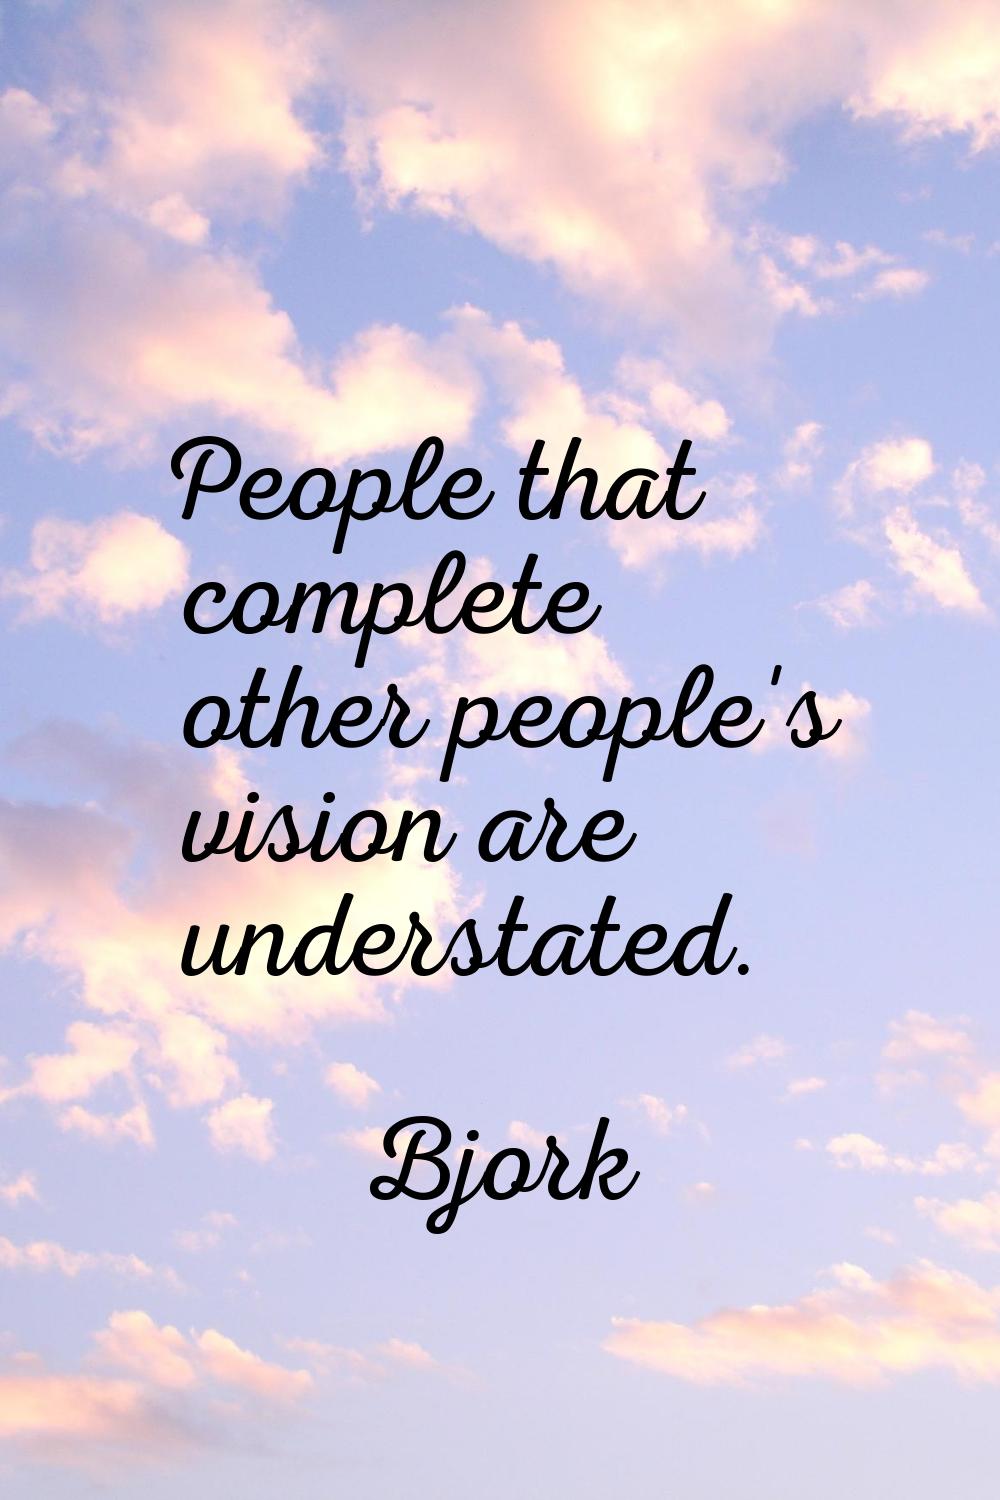 People that complete other people's vision are understated.